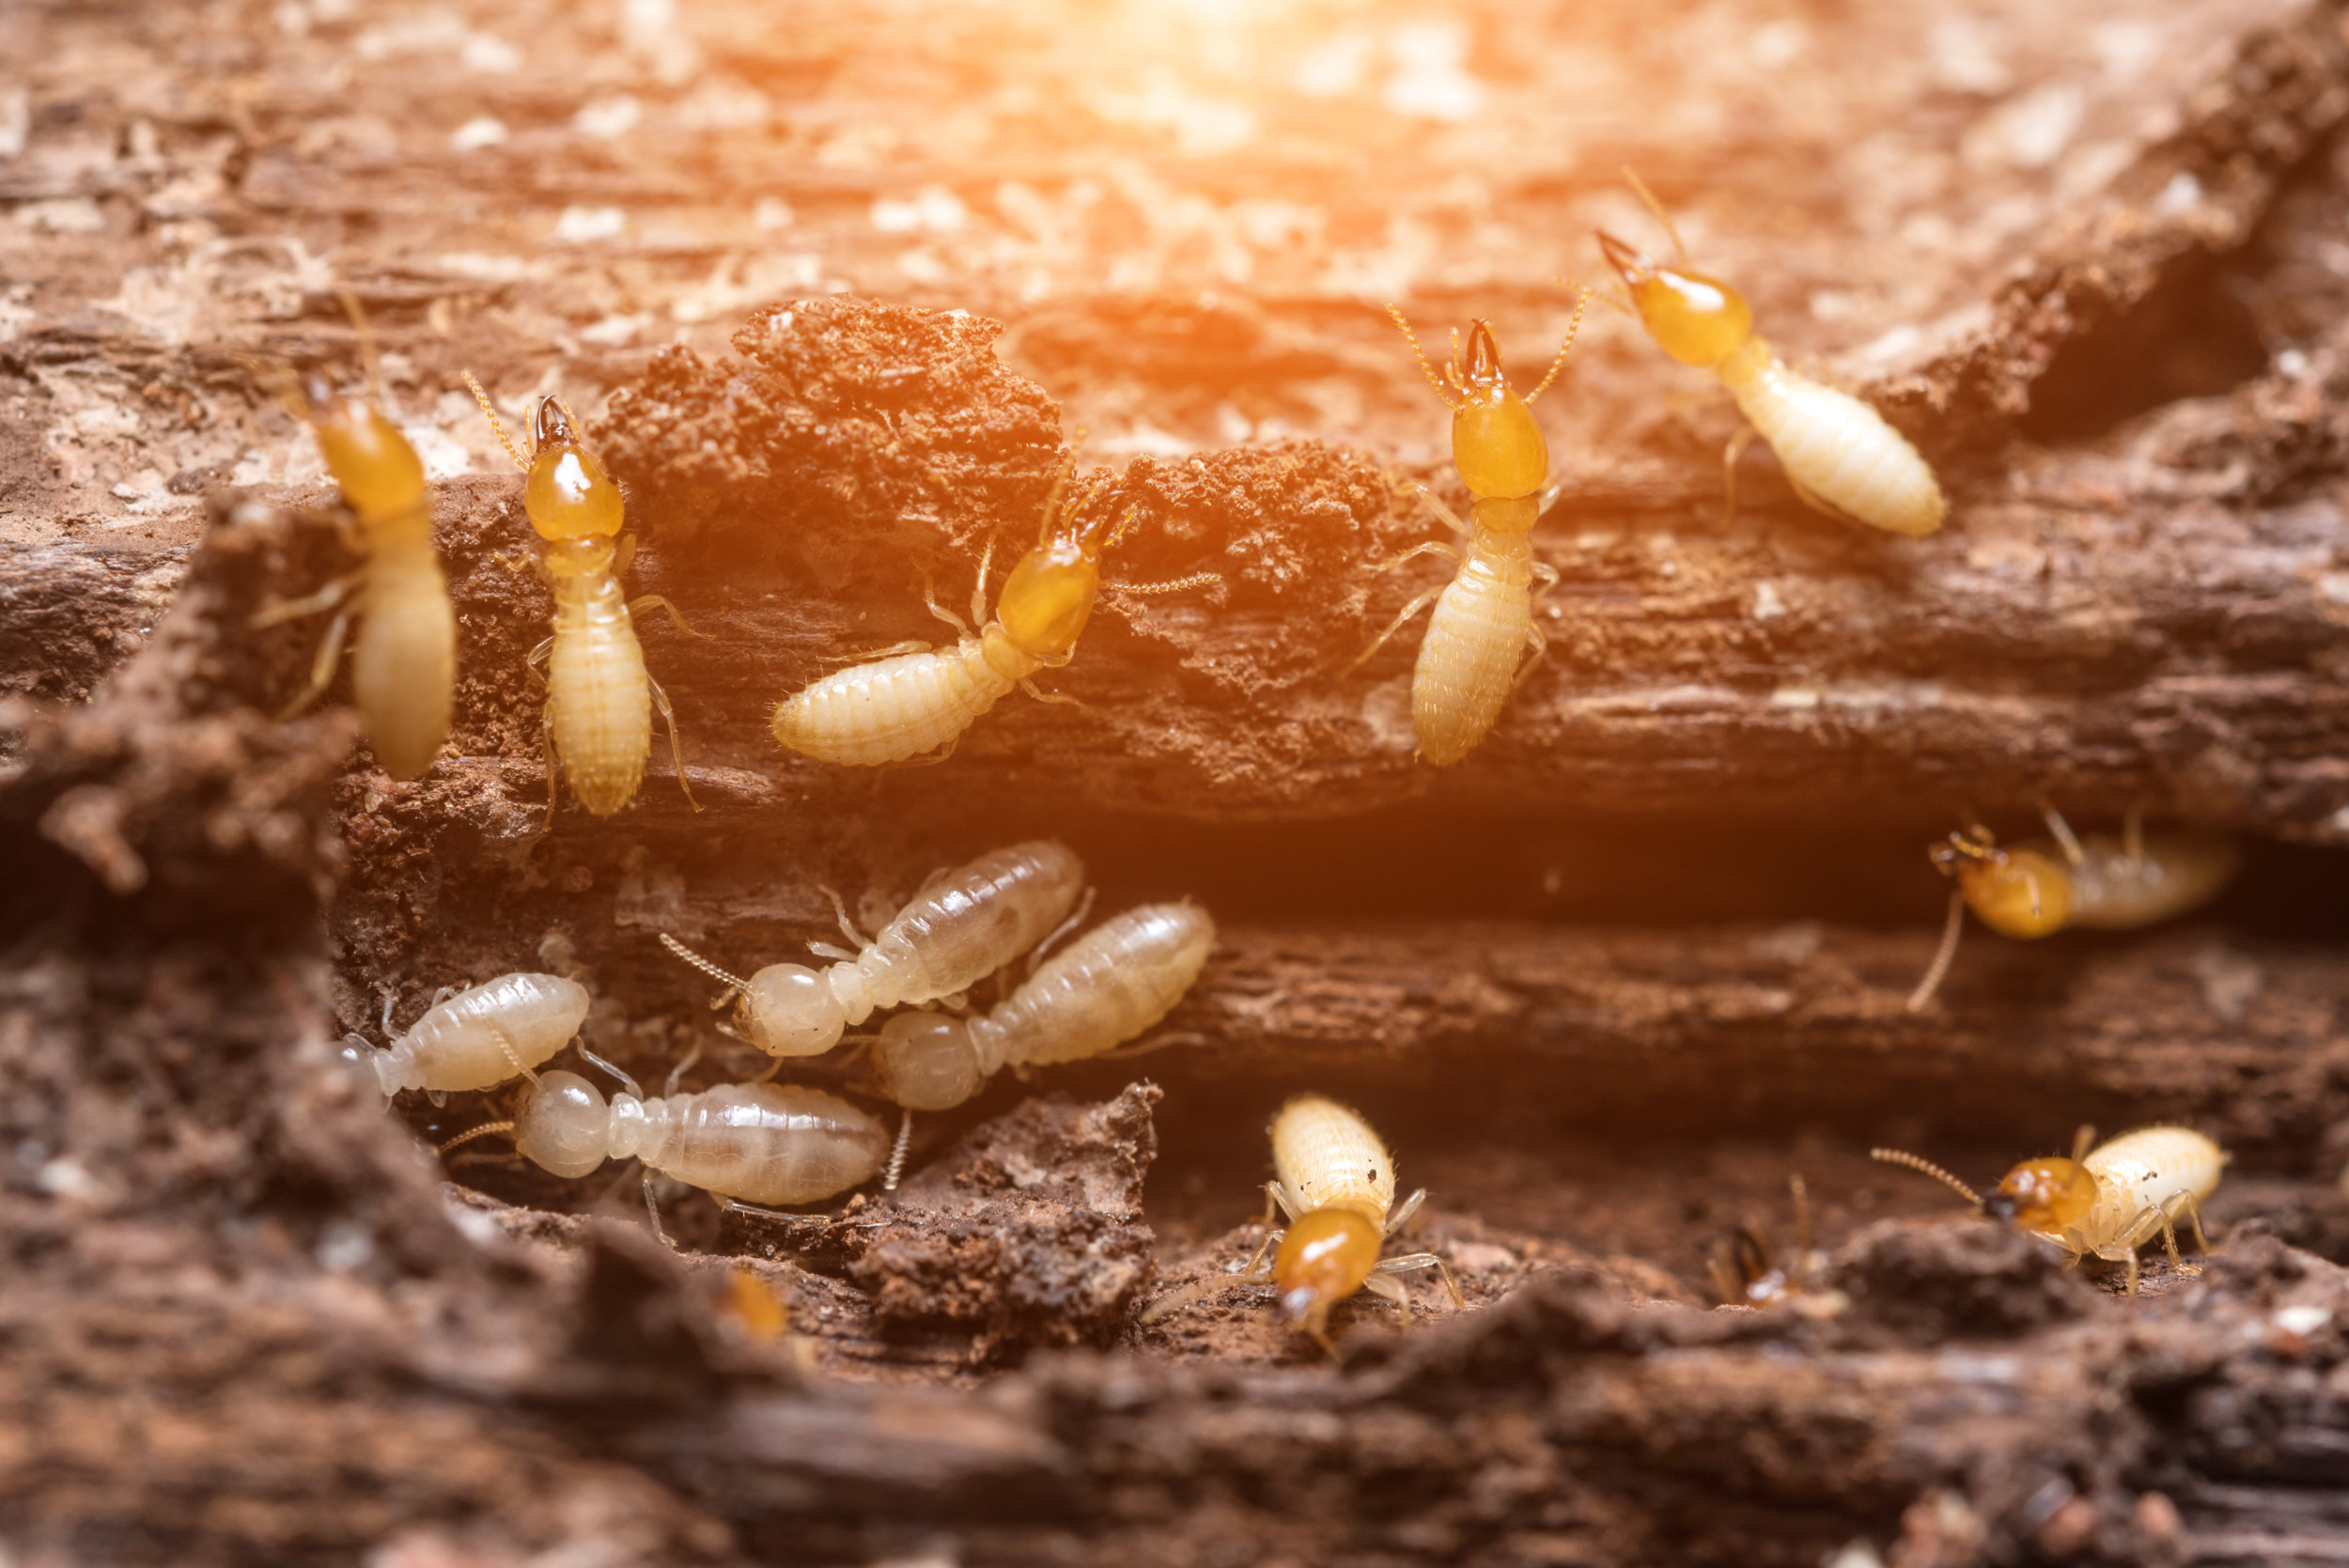   Proven Track Record   We are experts in termites for commercial properties. Our termite specialists have got you covered.   About Our Team  